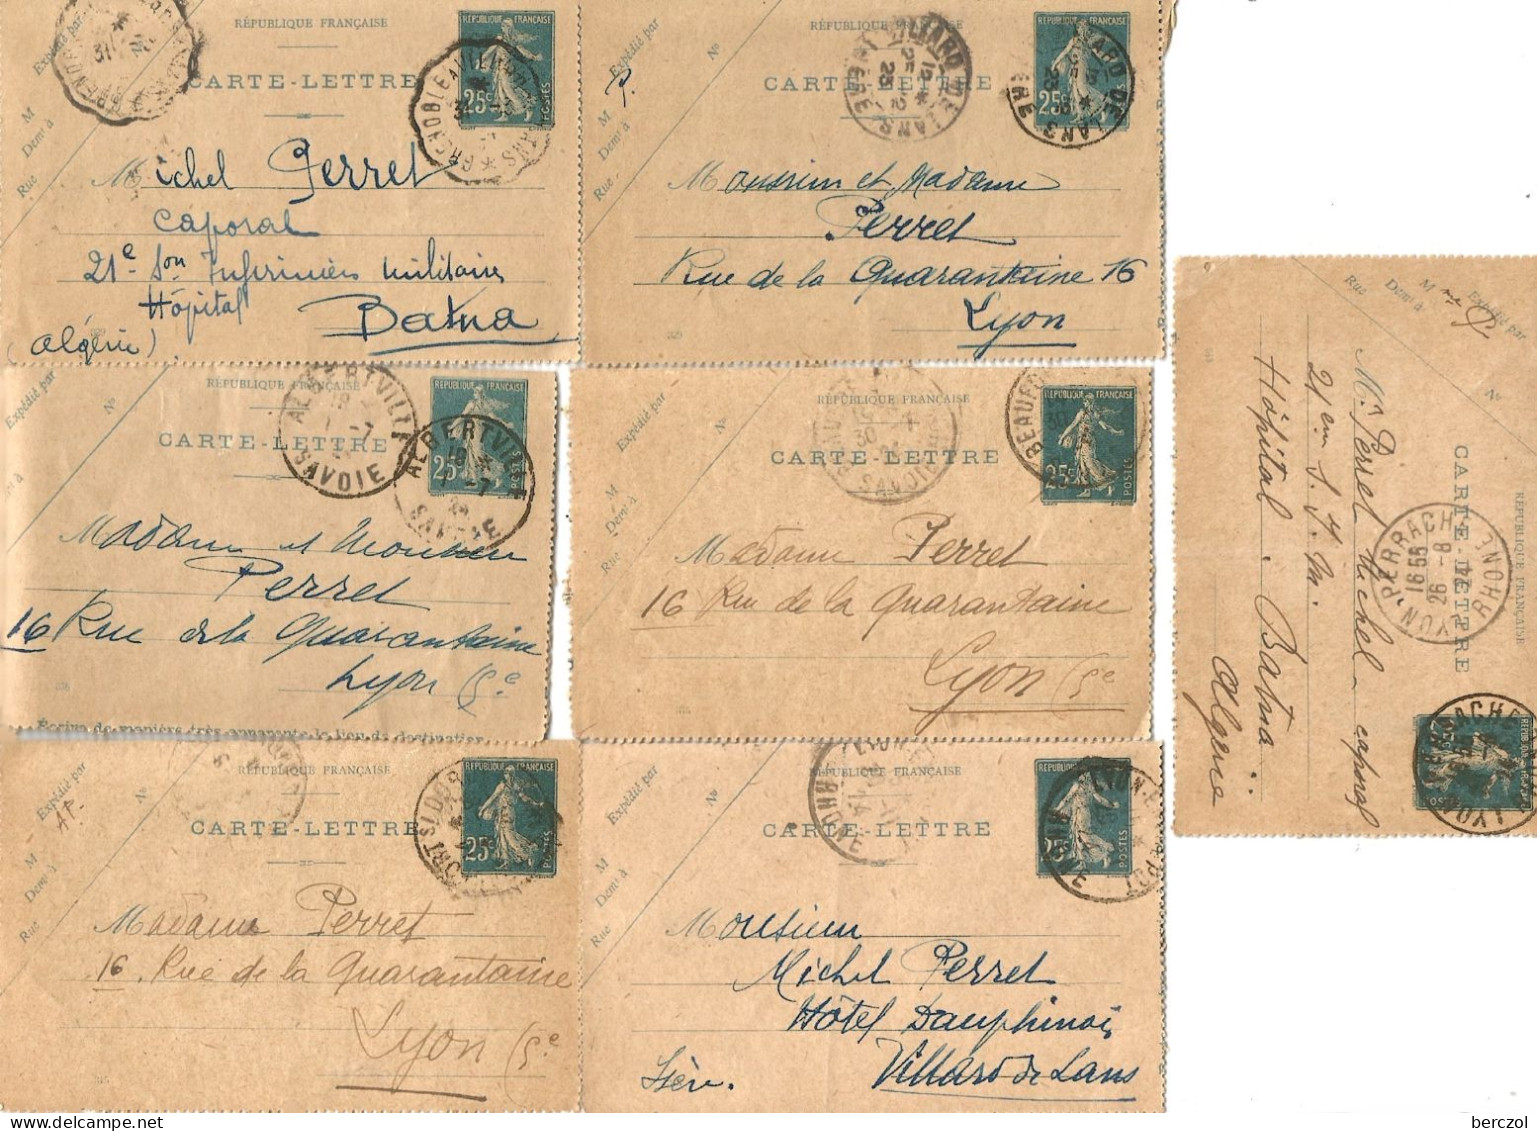 FRANCE ANNEE1907/1939 LOT DE 15 ENTIERS TYPE SEMEUSE CAMEE N° 140 CL2  TB DATE : 020;224;328;329;336;345;348 - Cartes-lettres